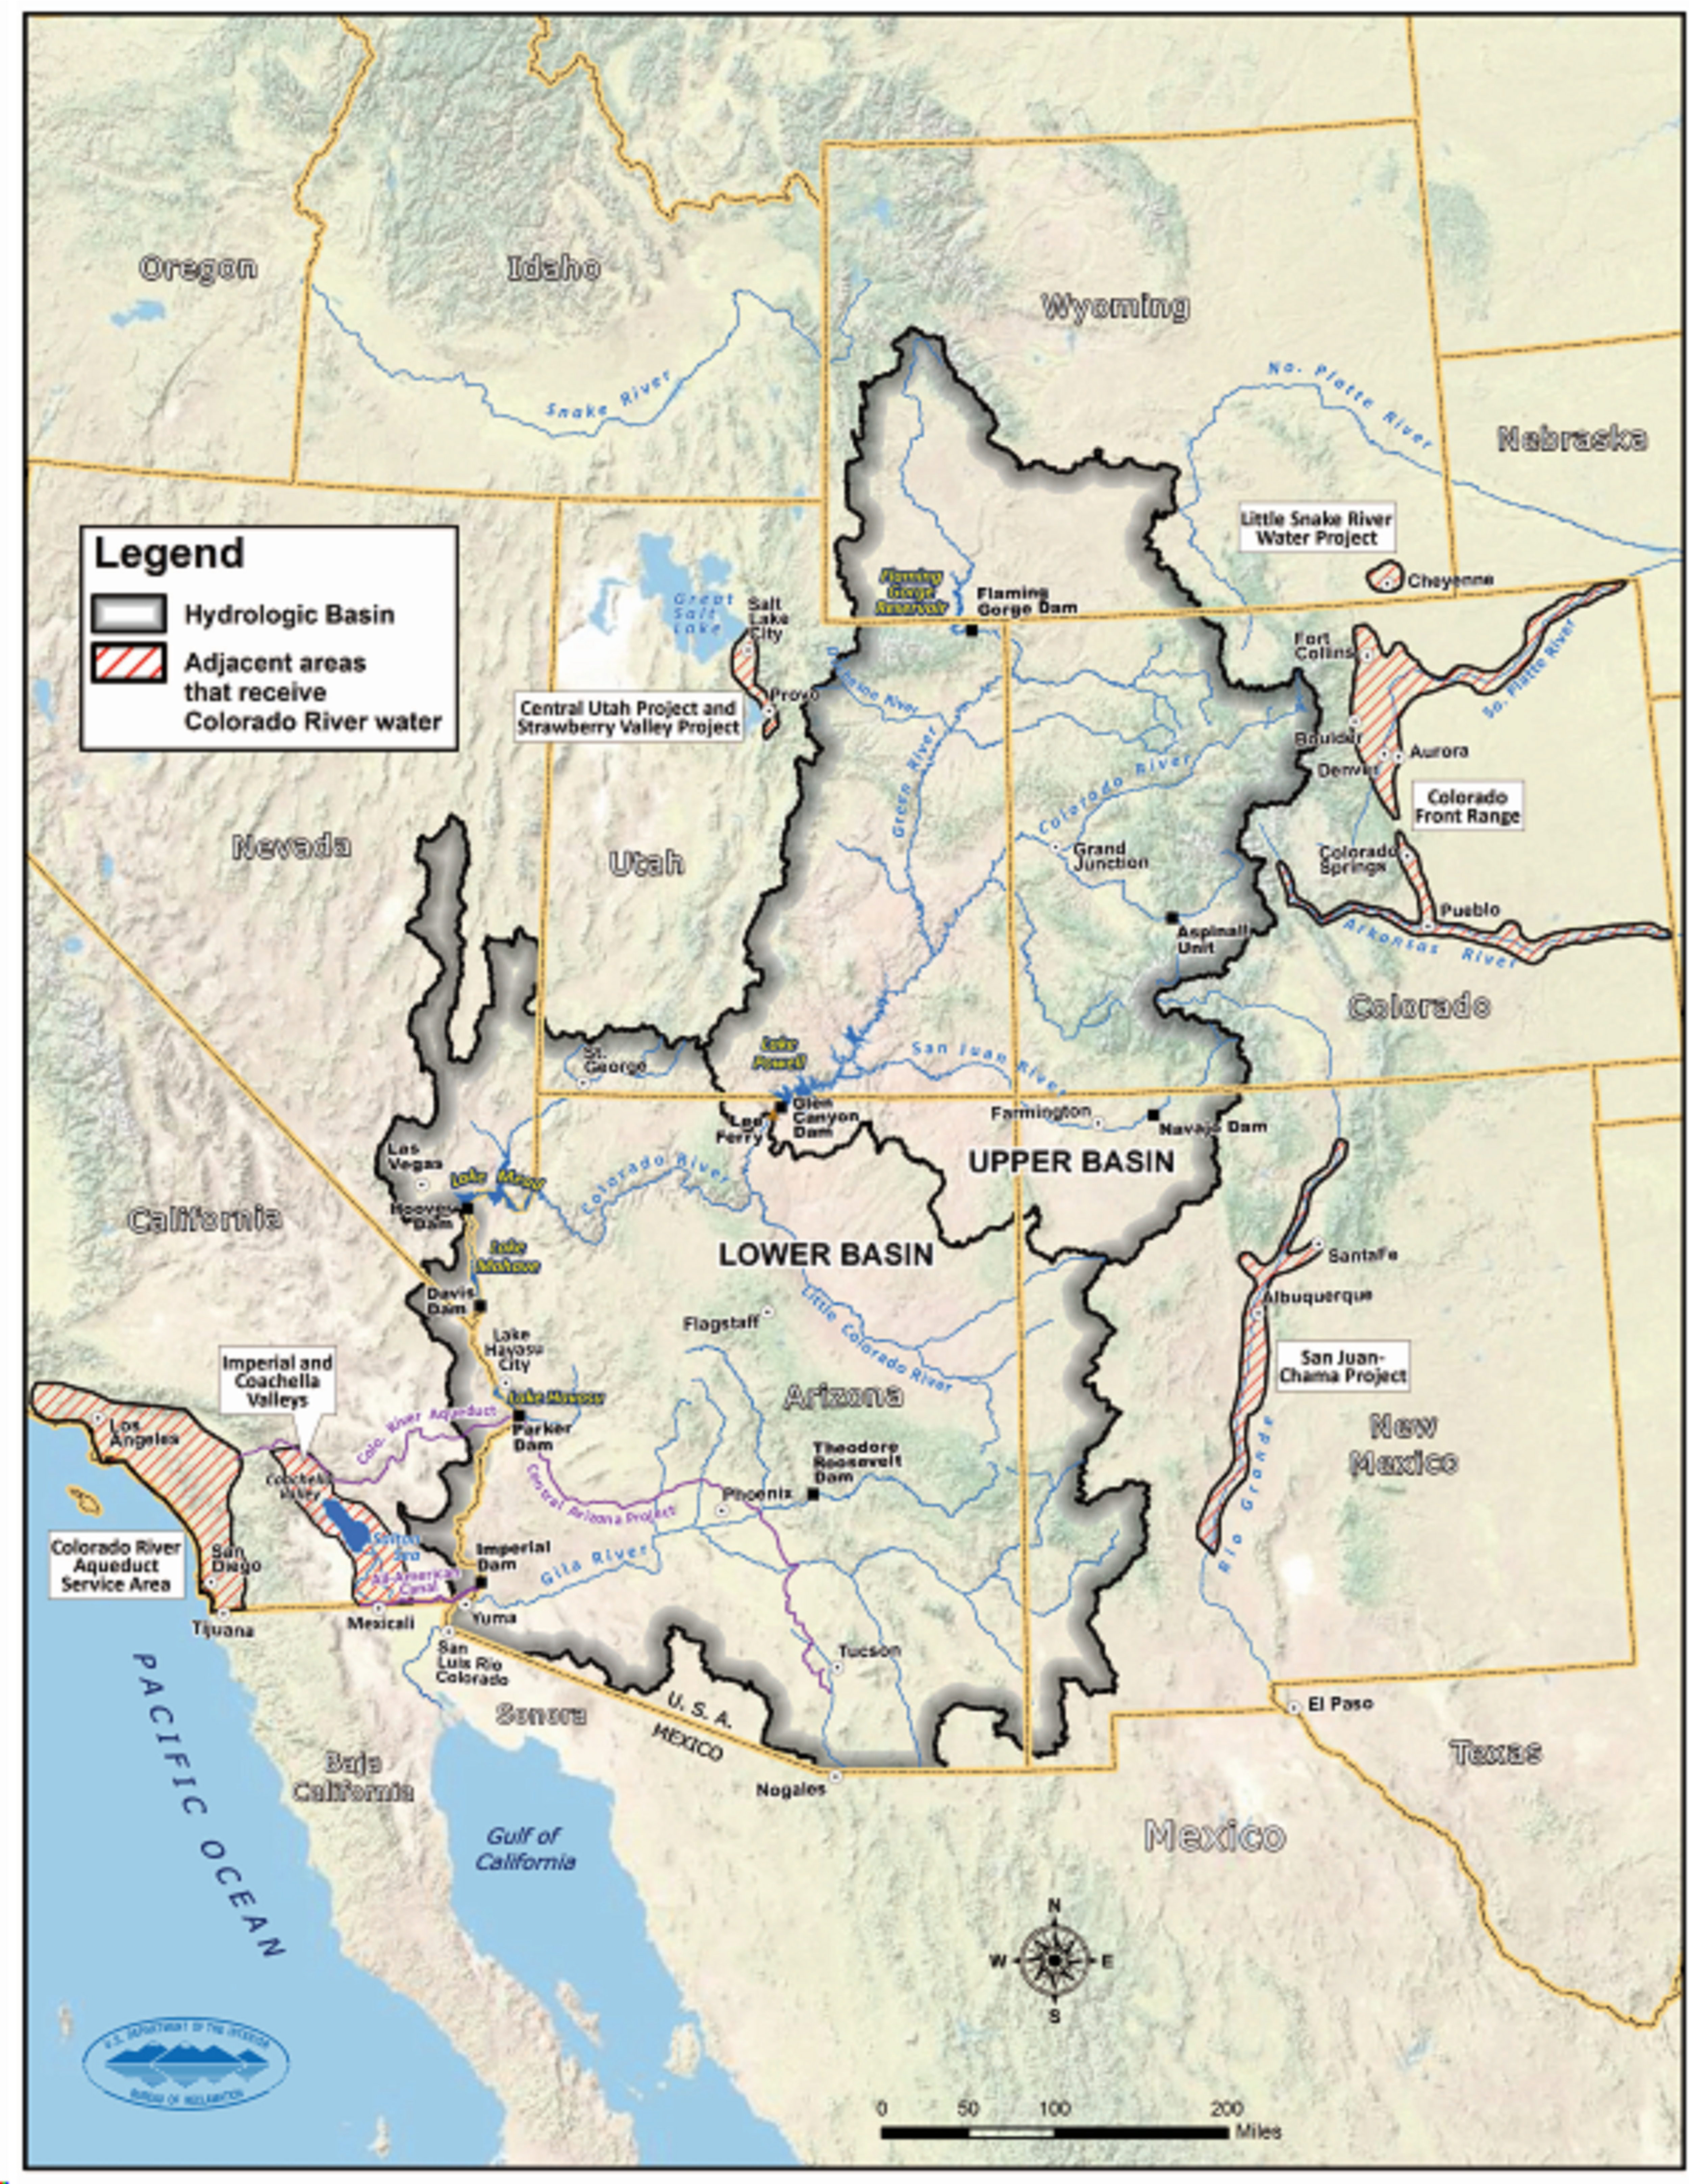 New Water Demand Management Agreement on the Colorado River